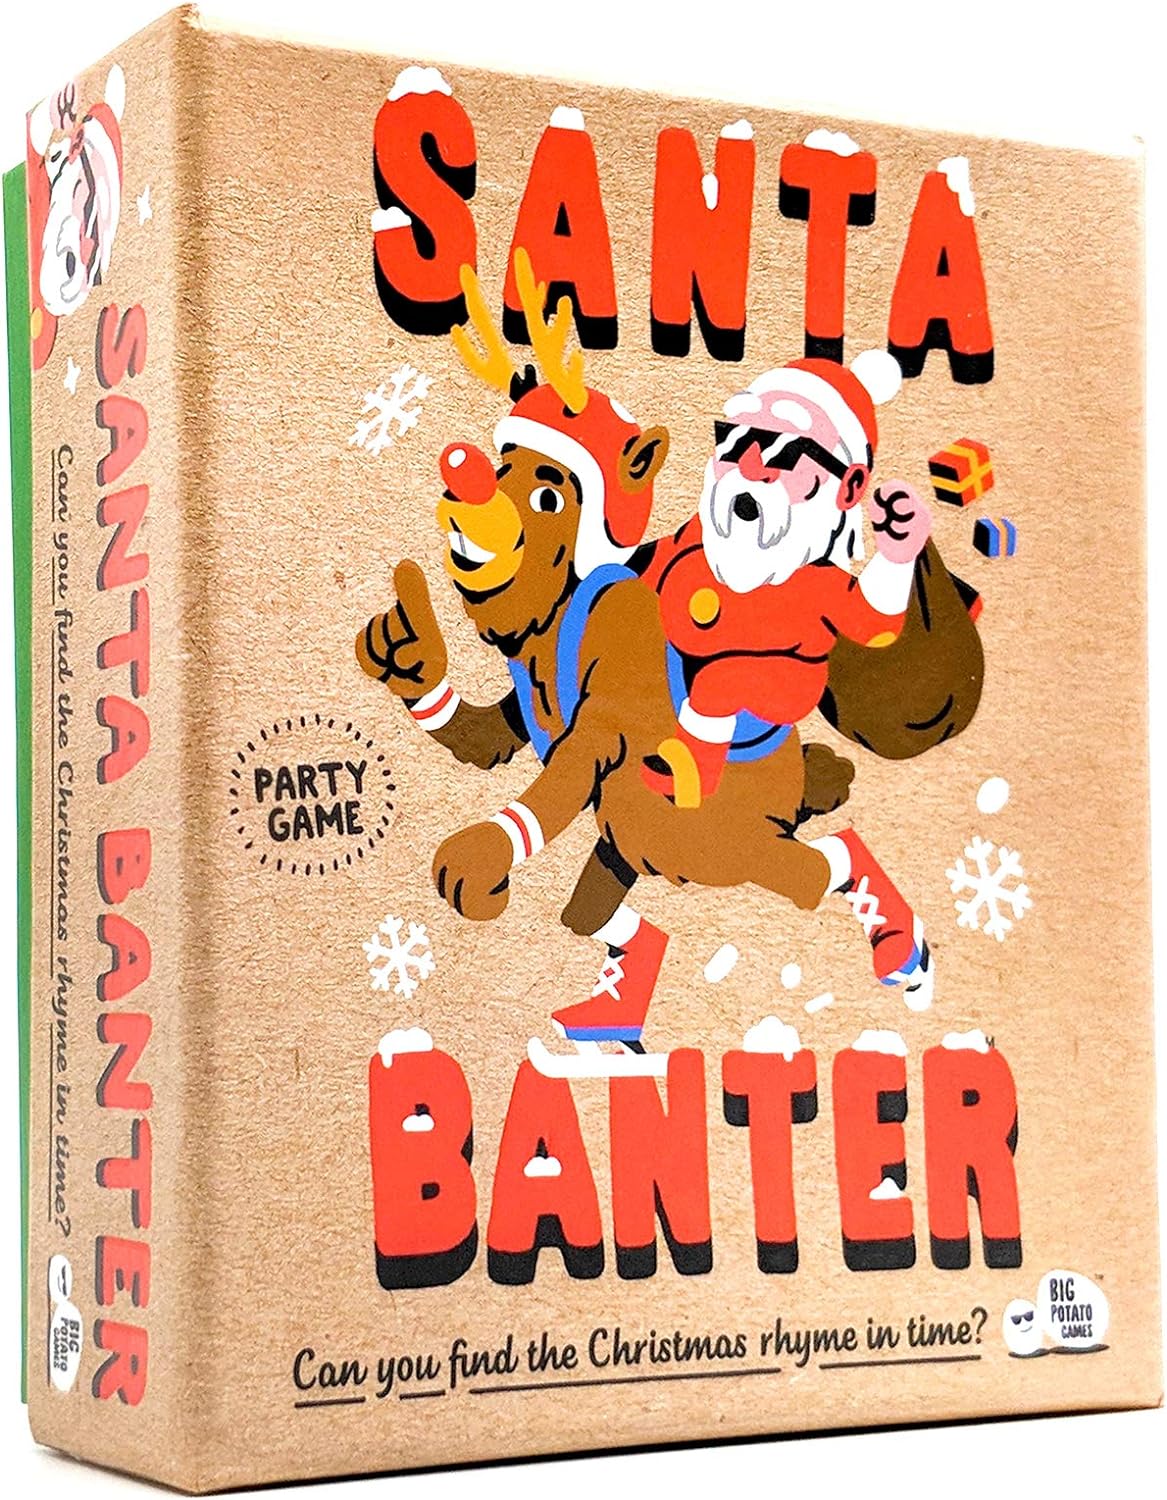 Santa Banter Hilarious Rhyming Christmas Board Game For Families. The Standalone Christmas Edition of the Popular Obama Llama Rhyme Series